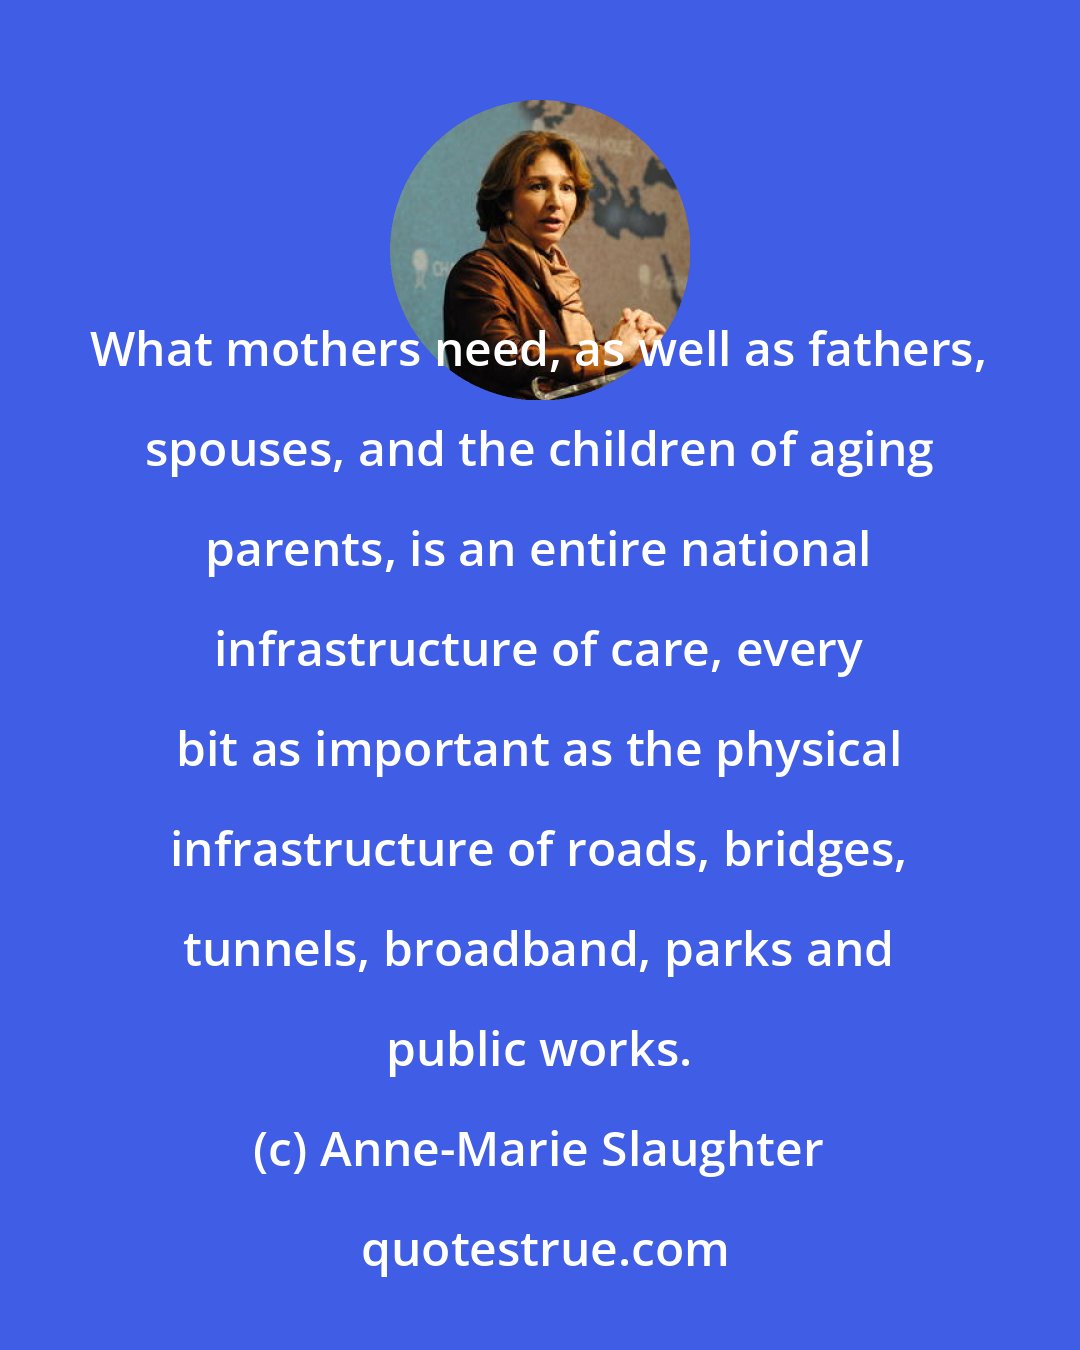 Anne-Marie Slaughter: What mothers need, as well as fathers, spouses, and the children of aging parents, is an entire national infrastructure of care, every bit as important as the physical infrastructure of roads, bridges, tunnels, broadband, parks and public works.